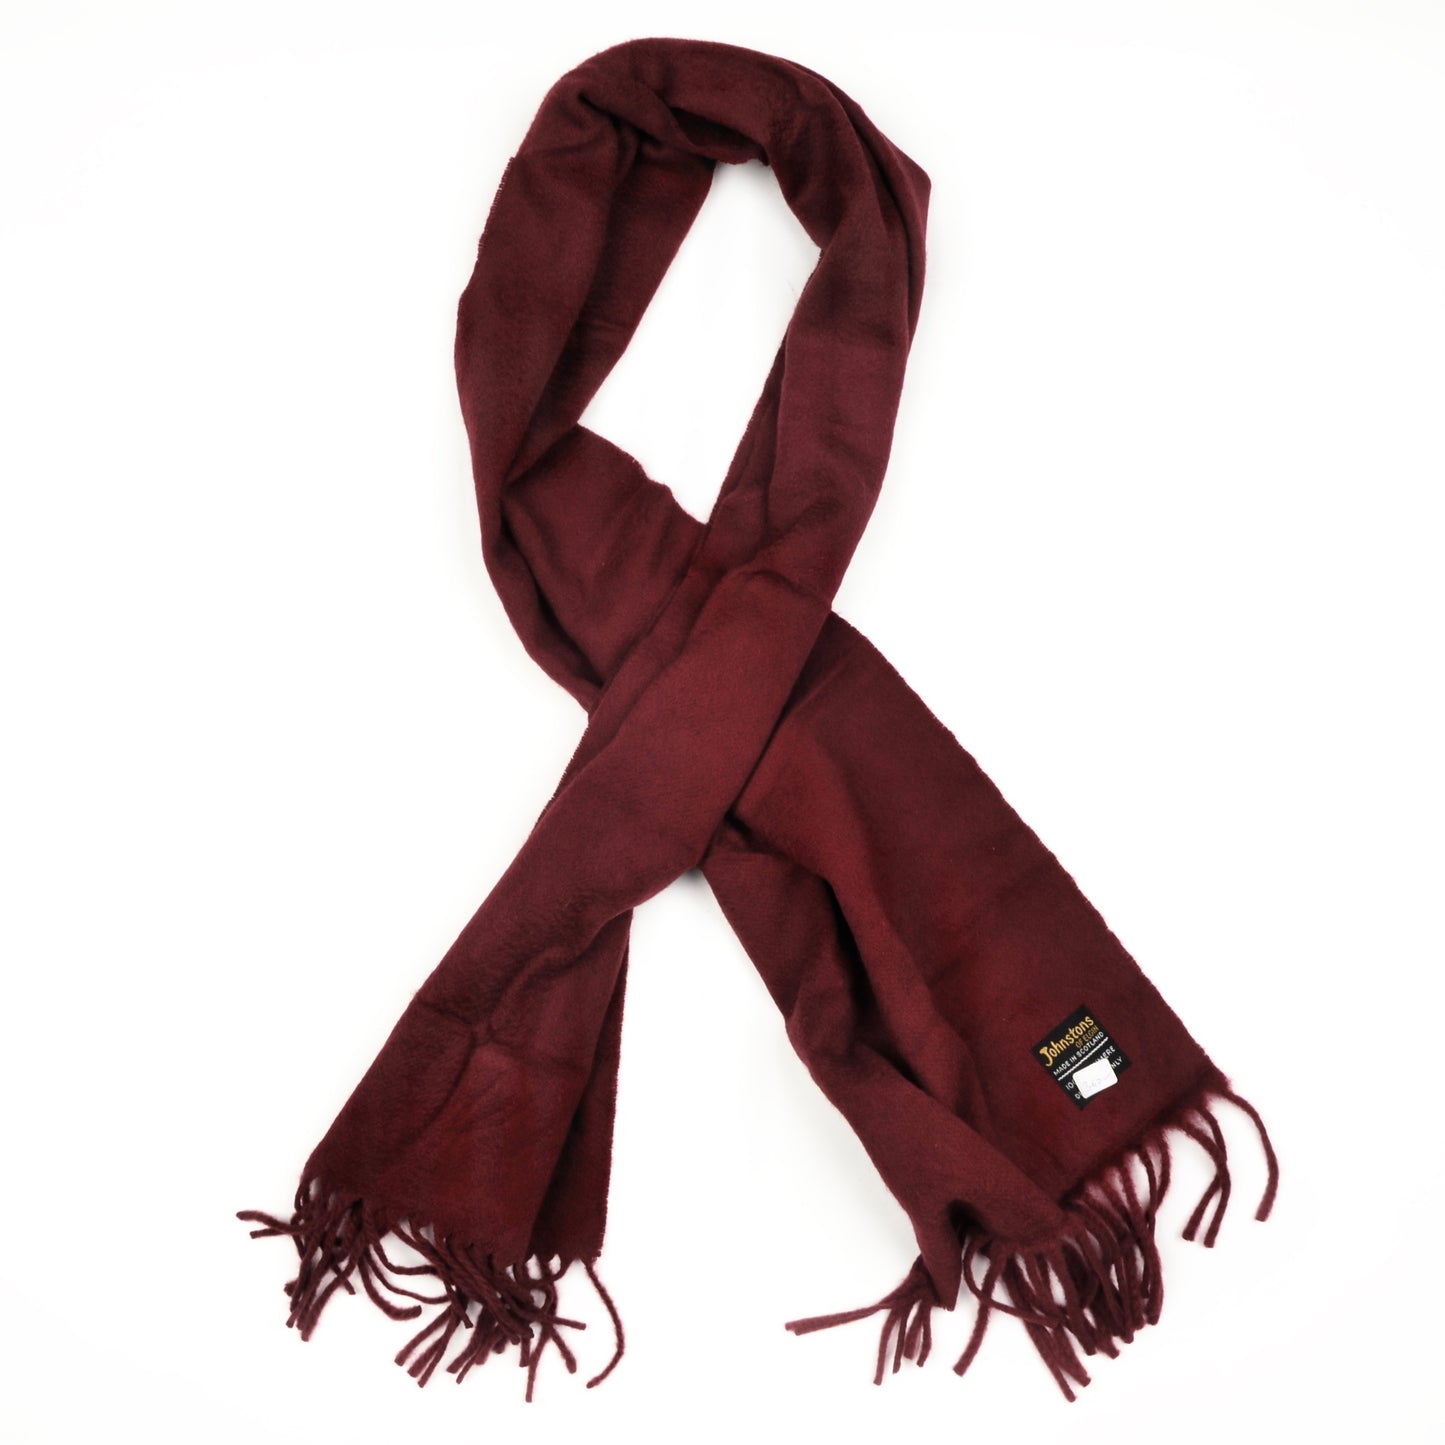 Cashmere Scarf by Johnstons of Elgin - Burgundy